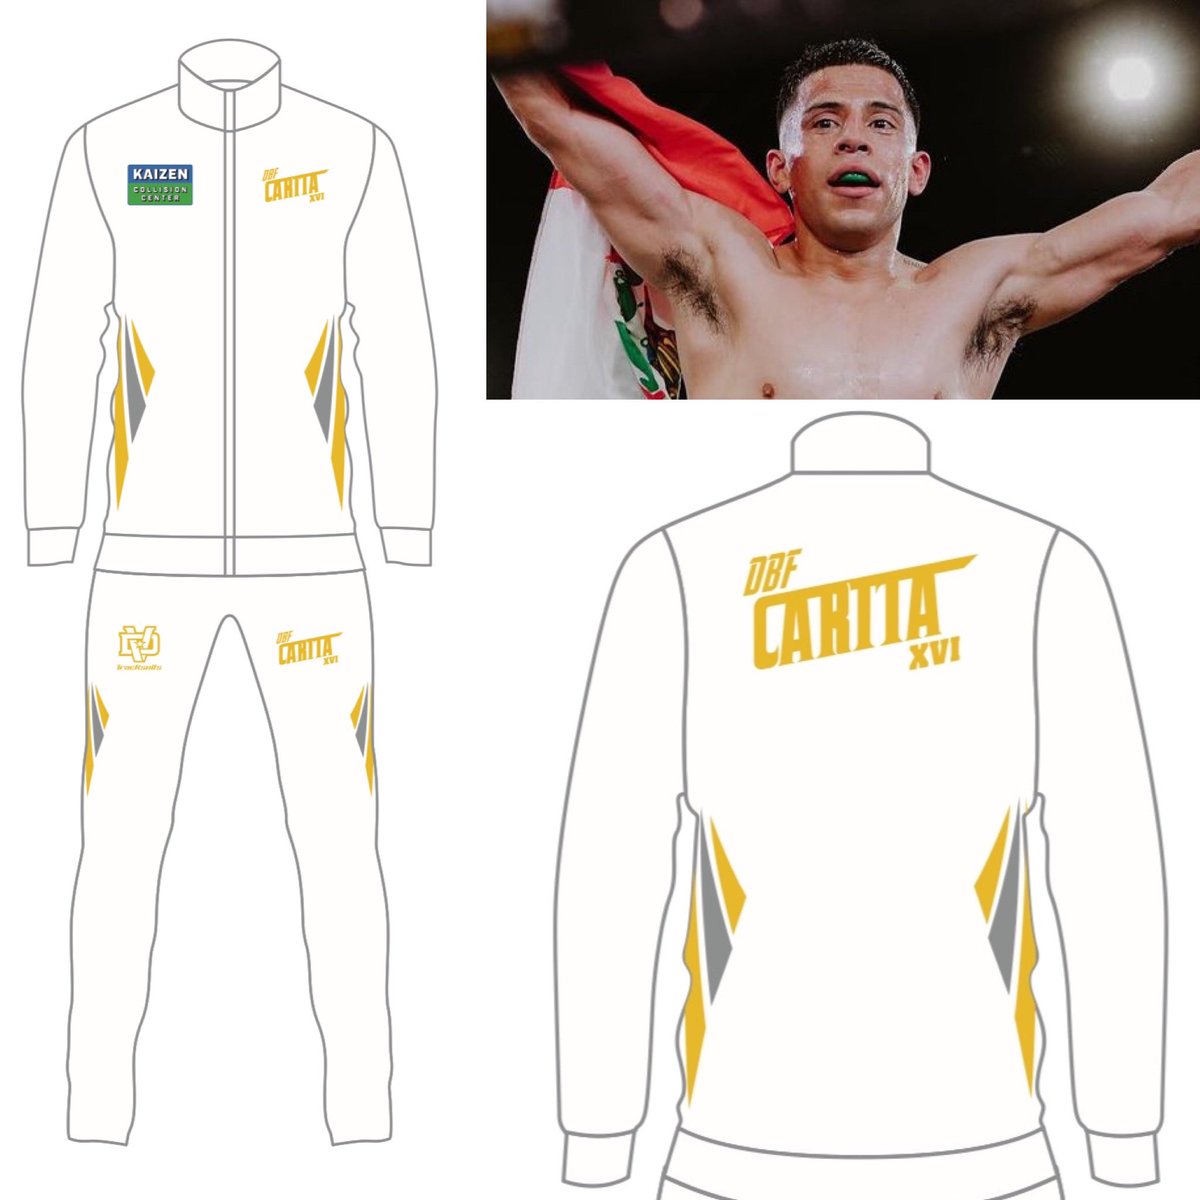 #Clean Finished DVTracksuit design for Undefeated prospect @dbfcarita who returns June 29th in Arizona on #EstradaRodriguez